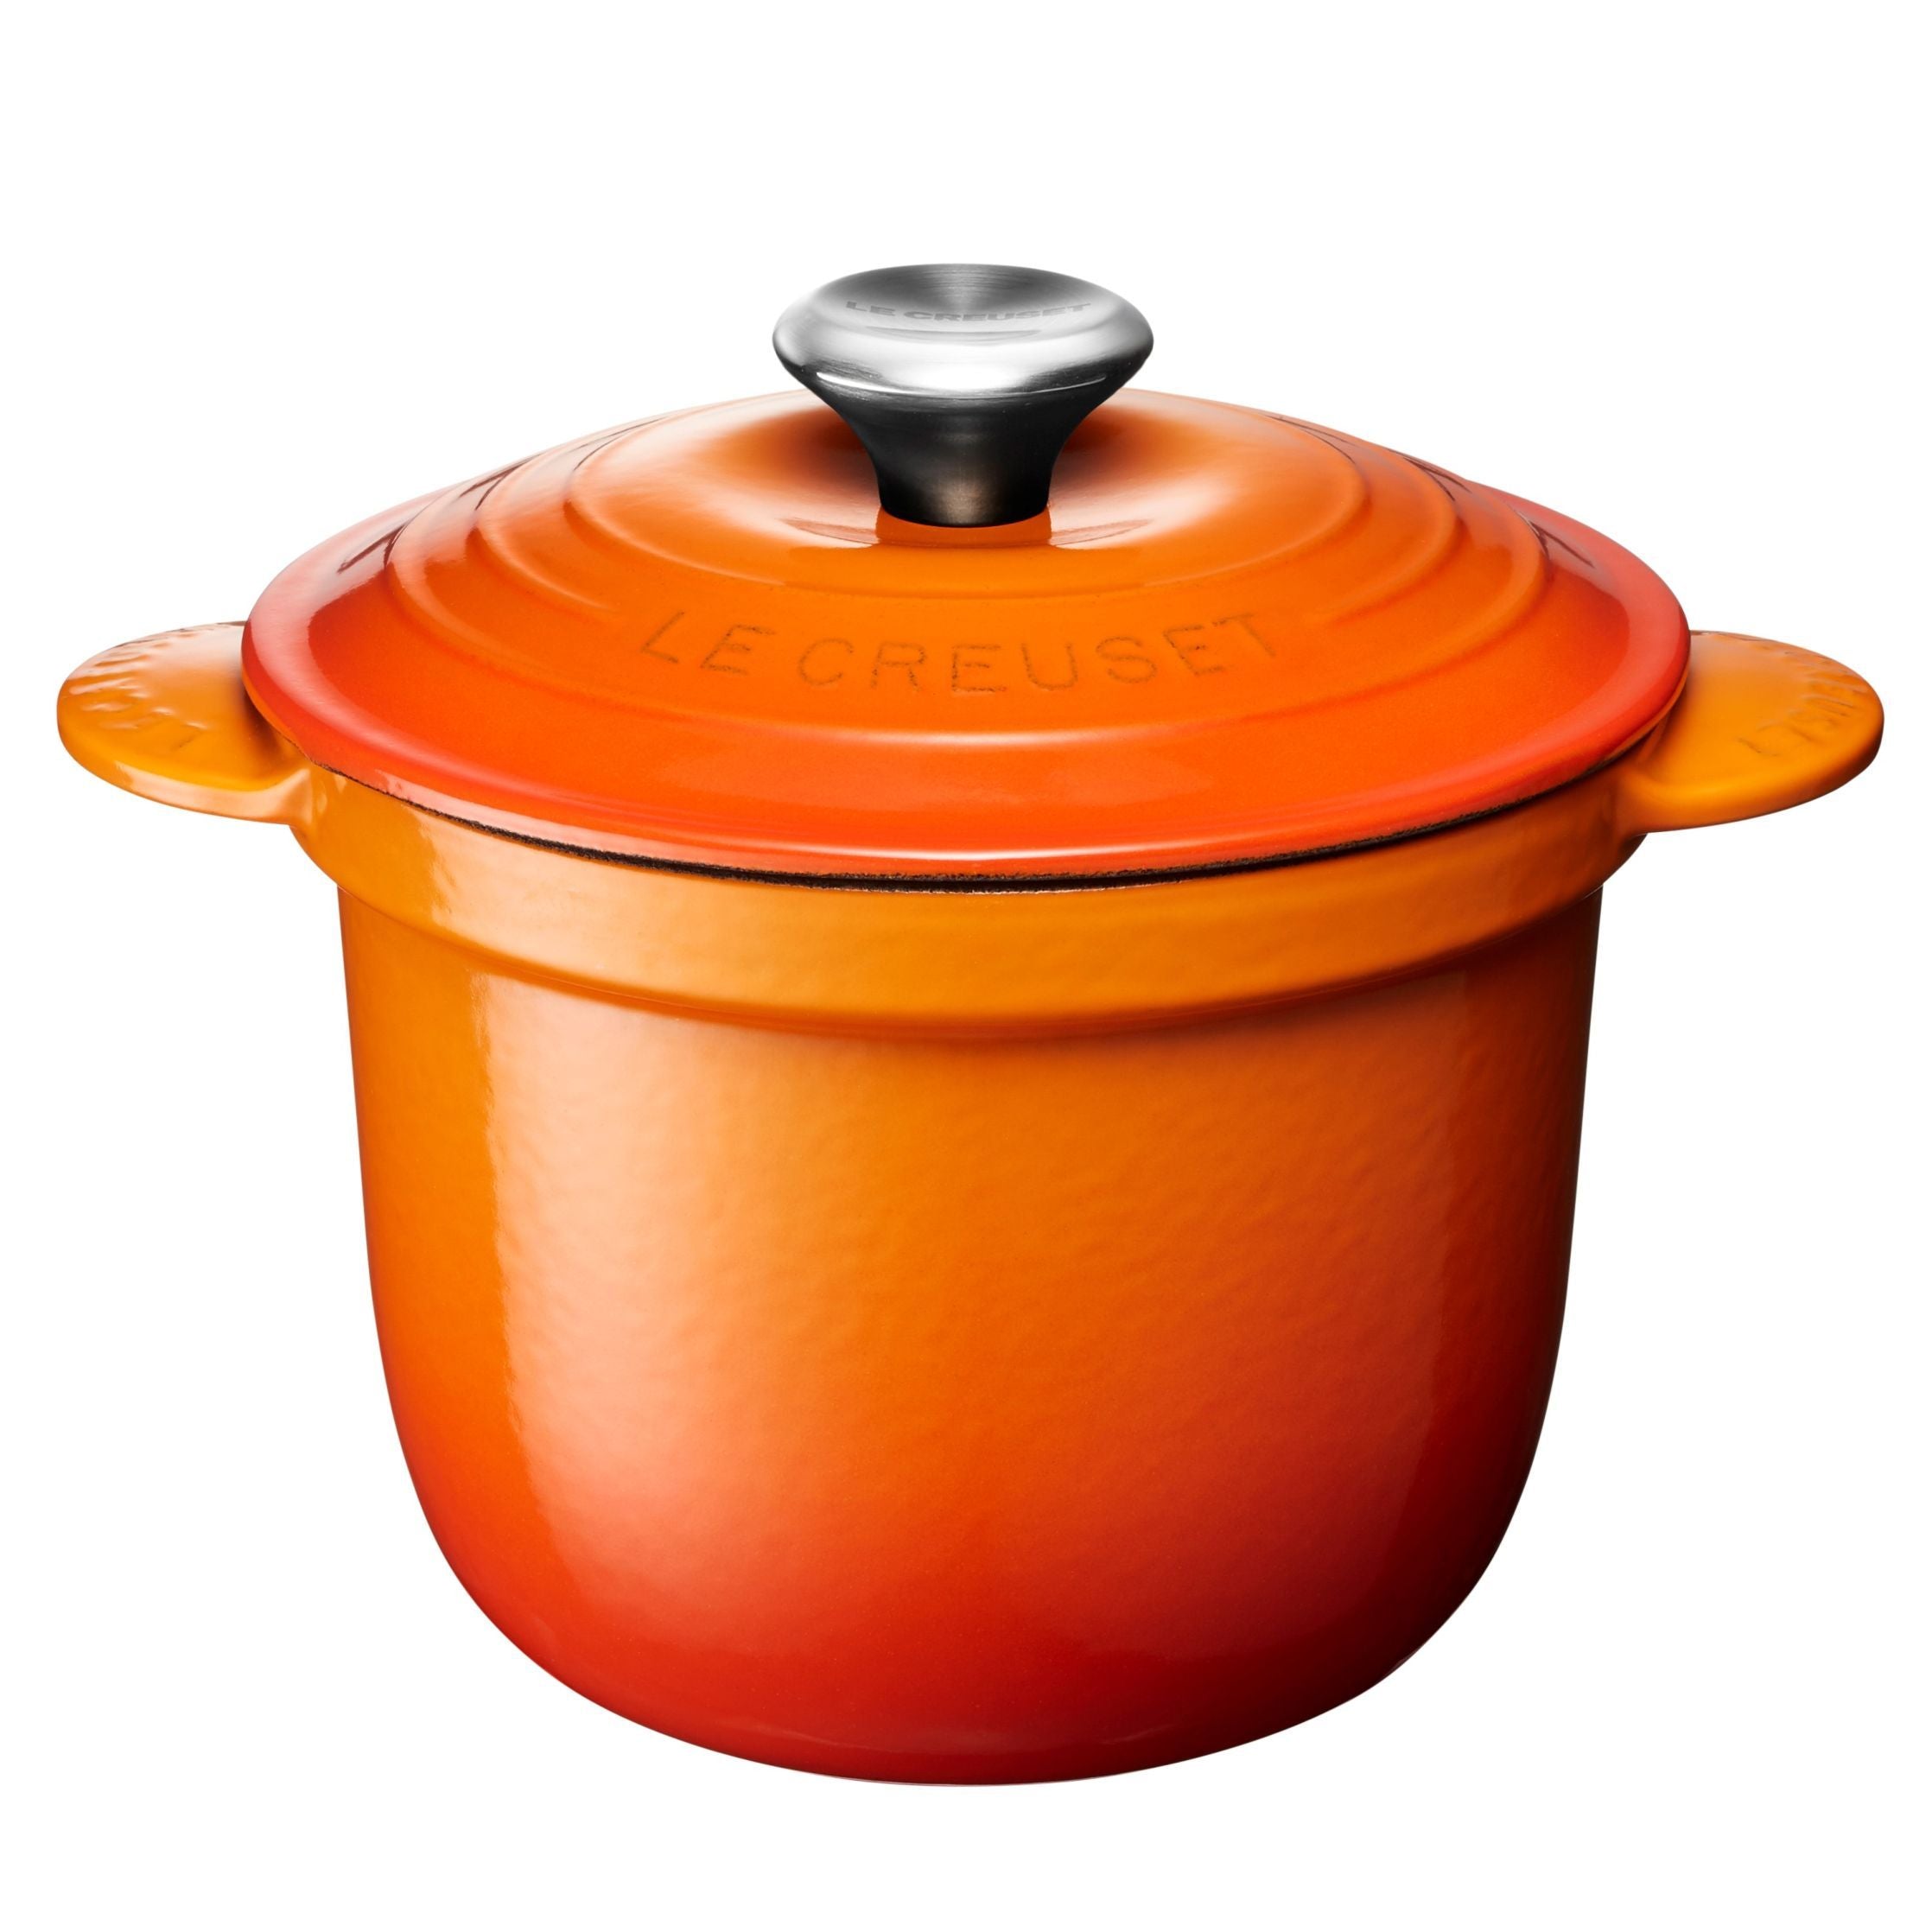 Le Creuset Cocotte Every With Poteriedeckel 18 Cm, Oven Red